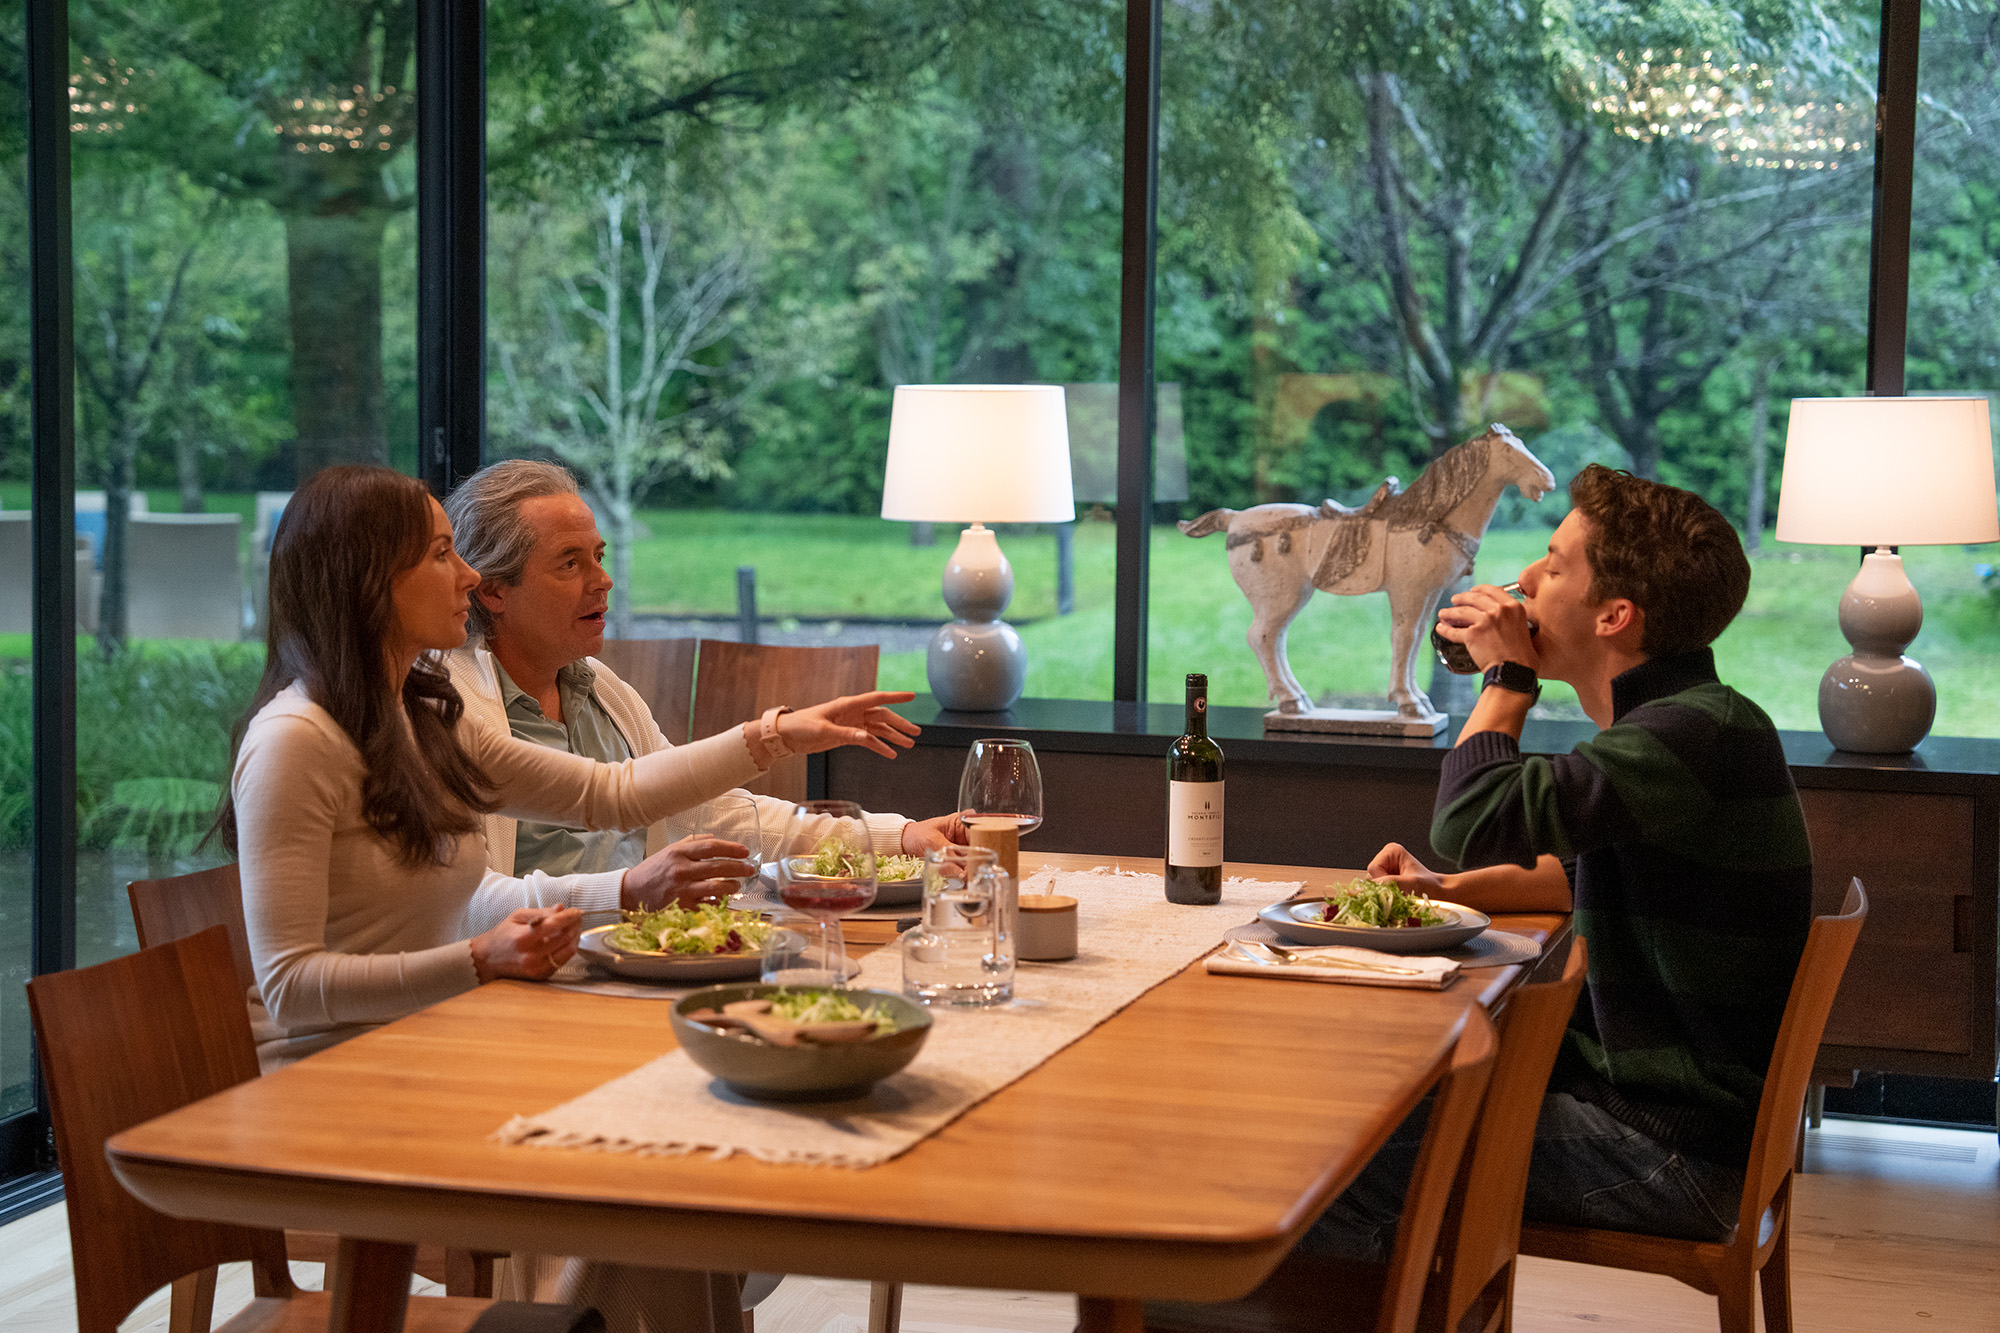 A middle-aged white woman and man and a white teen boy sit at an elegantly set dinner table overlooking a garden.